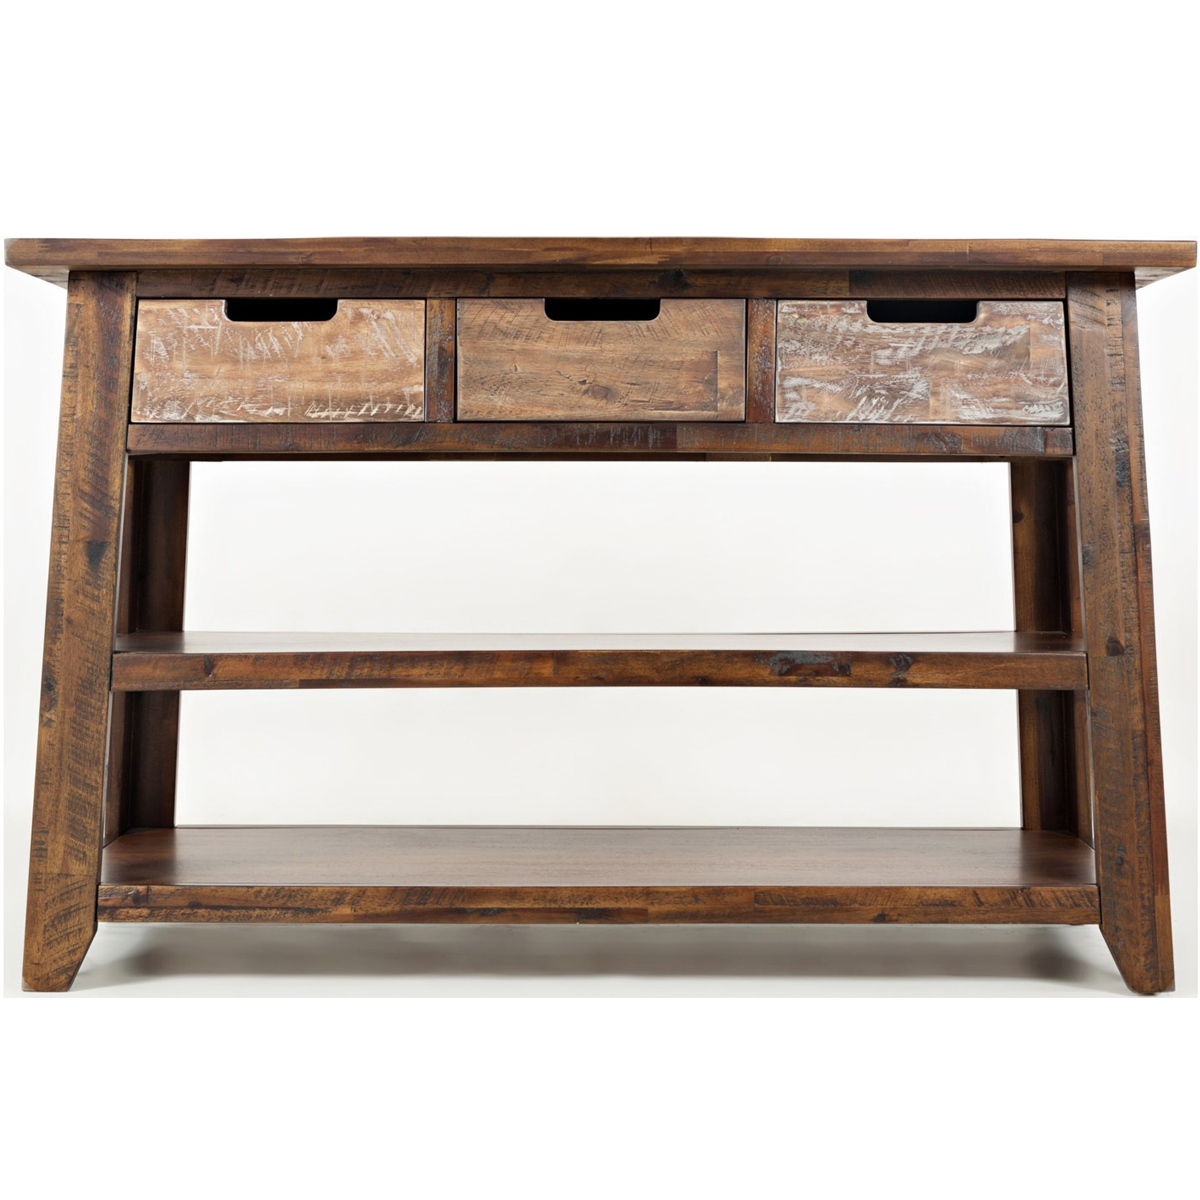 Picture of PAINT CANYON SOFA TABLE